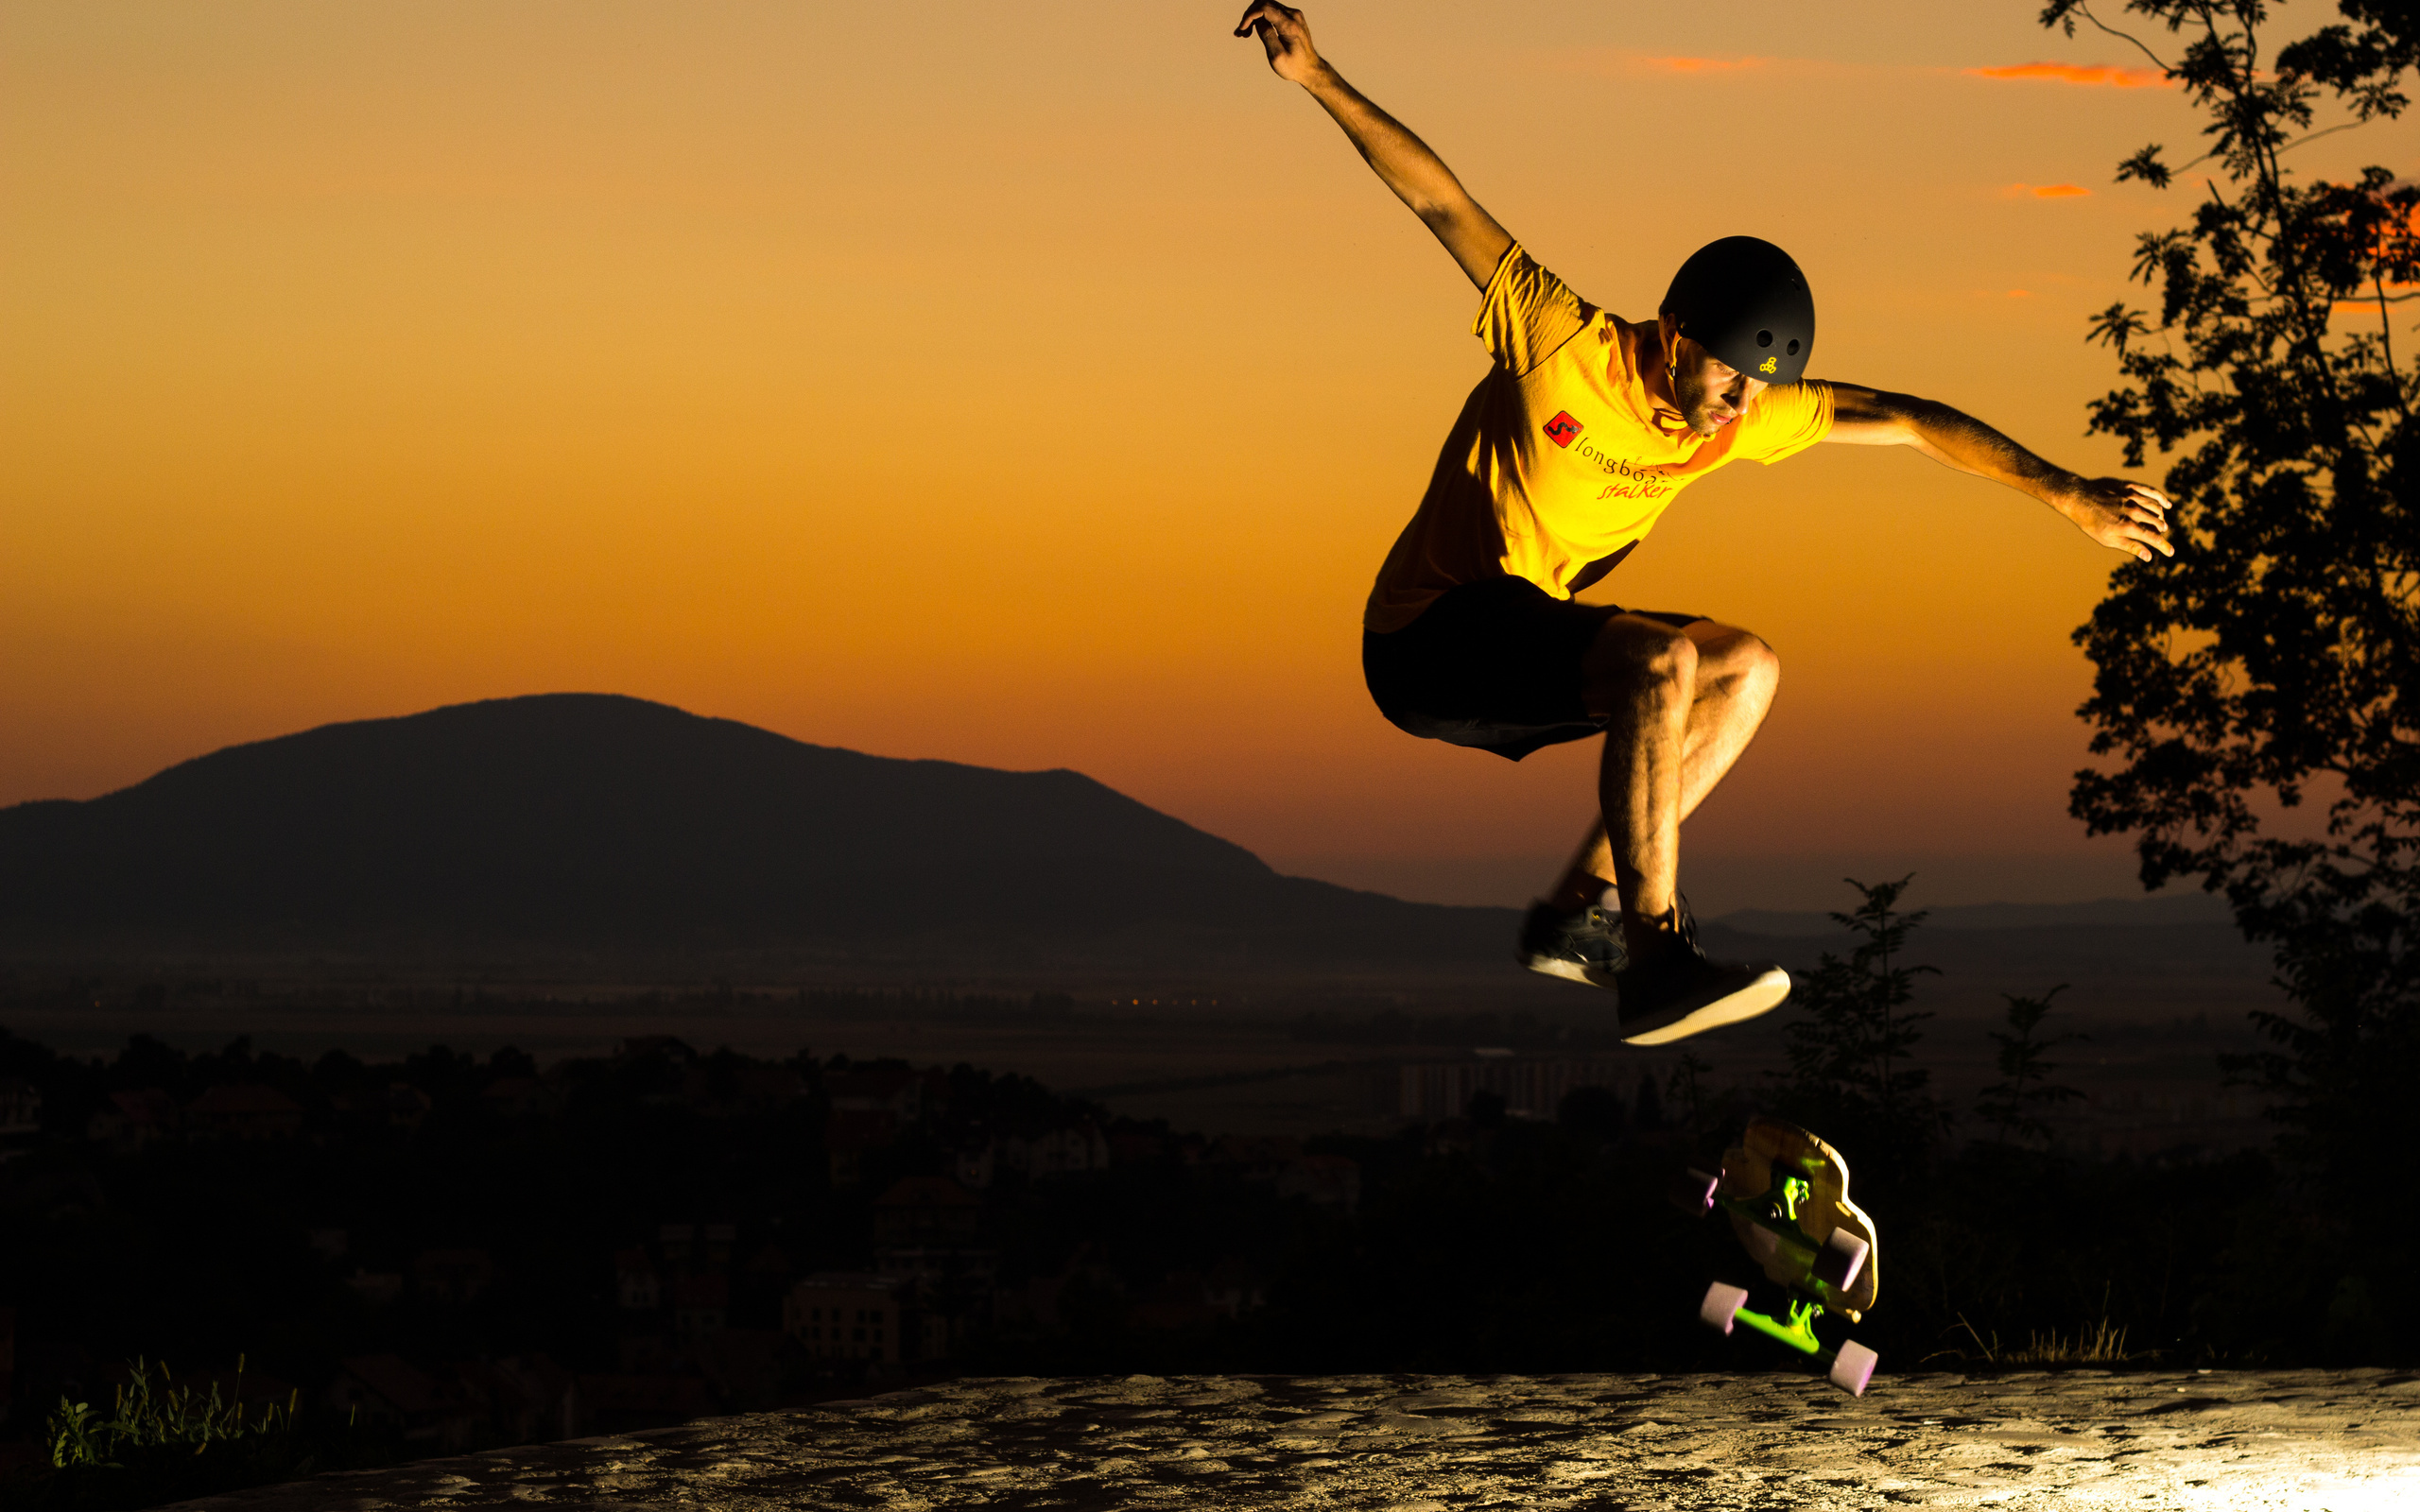 Skateboarding: Professional skater performs a trick using a modern skateboard in the sunset, Action sport. 2560x1600 HD Background.